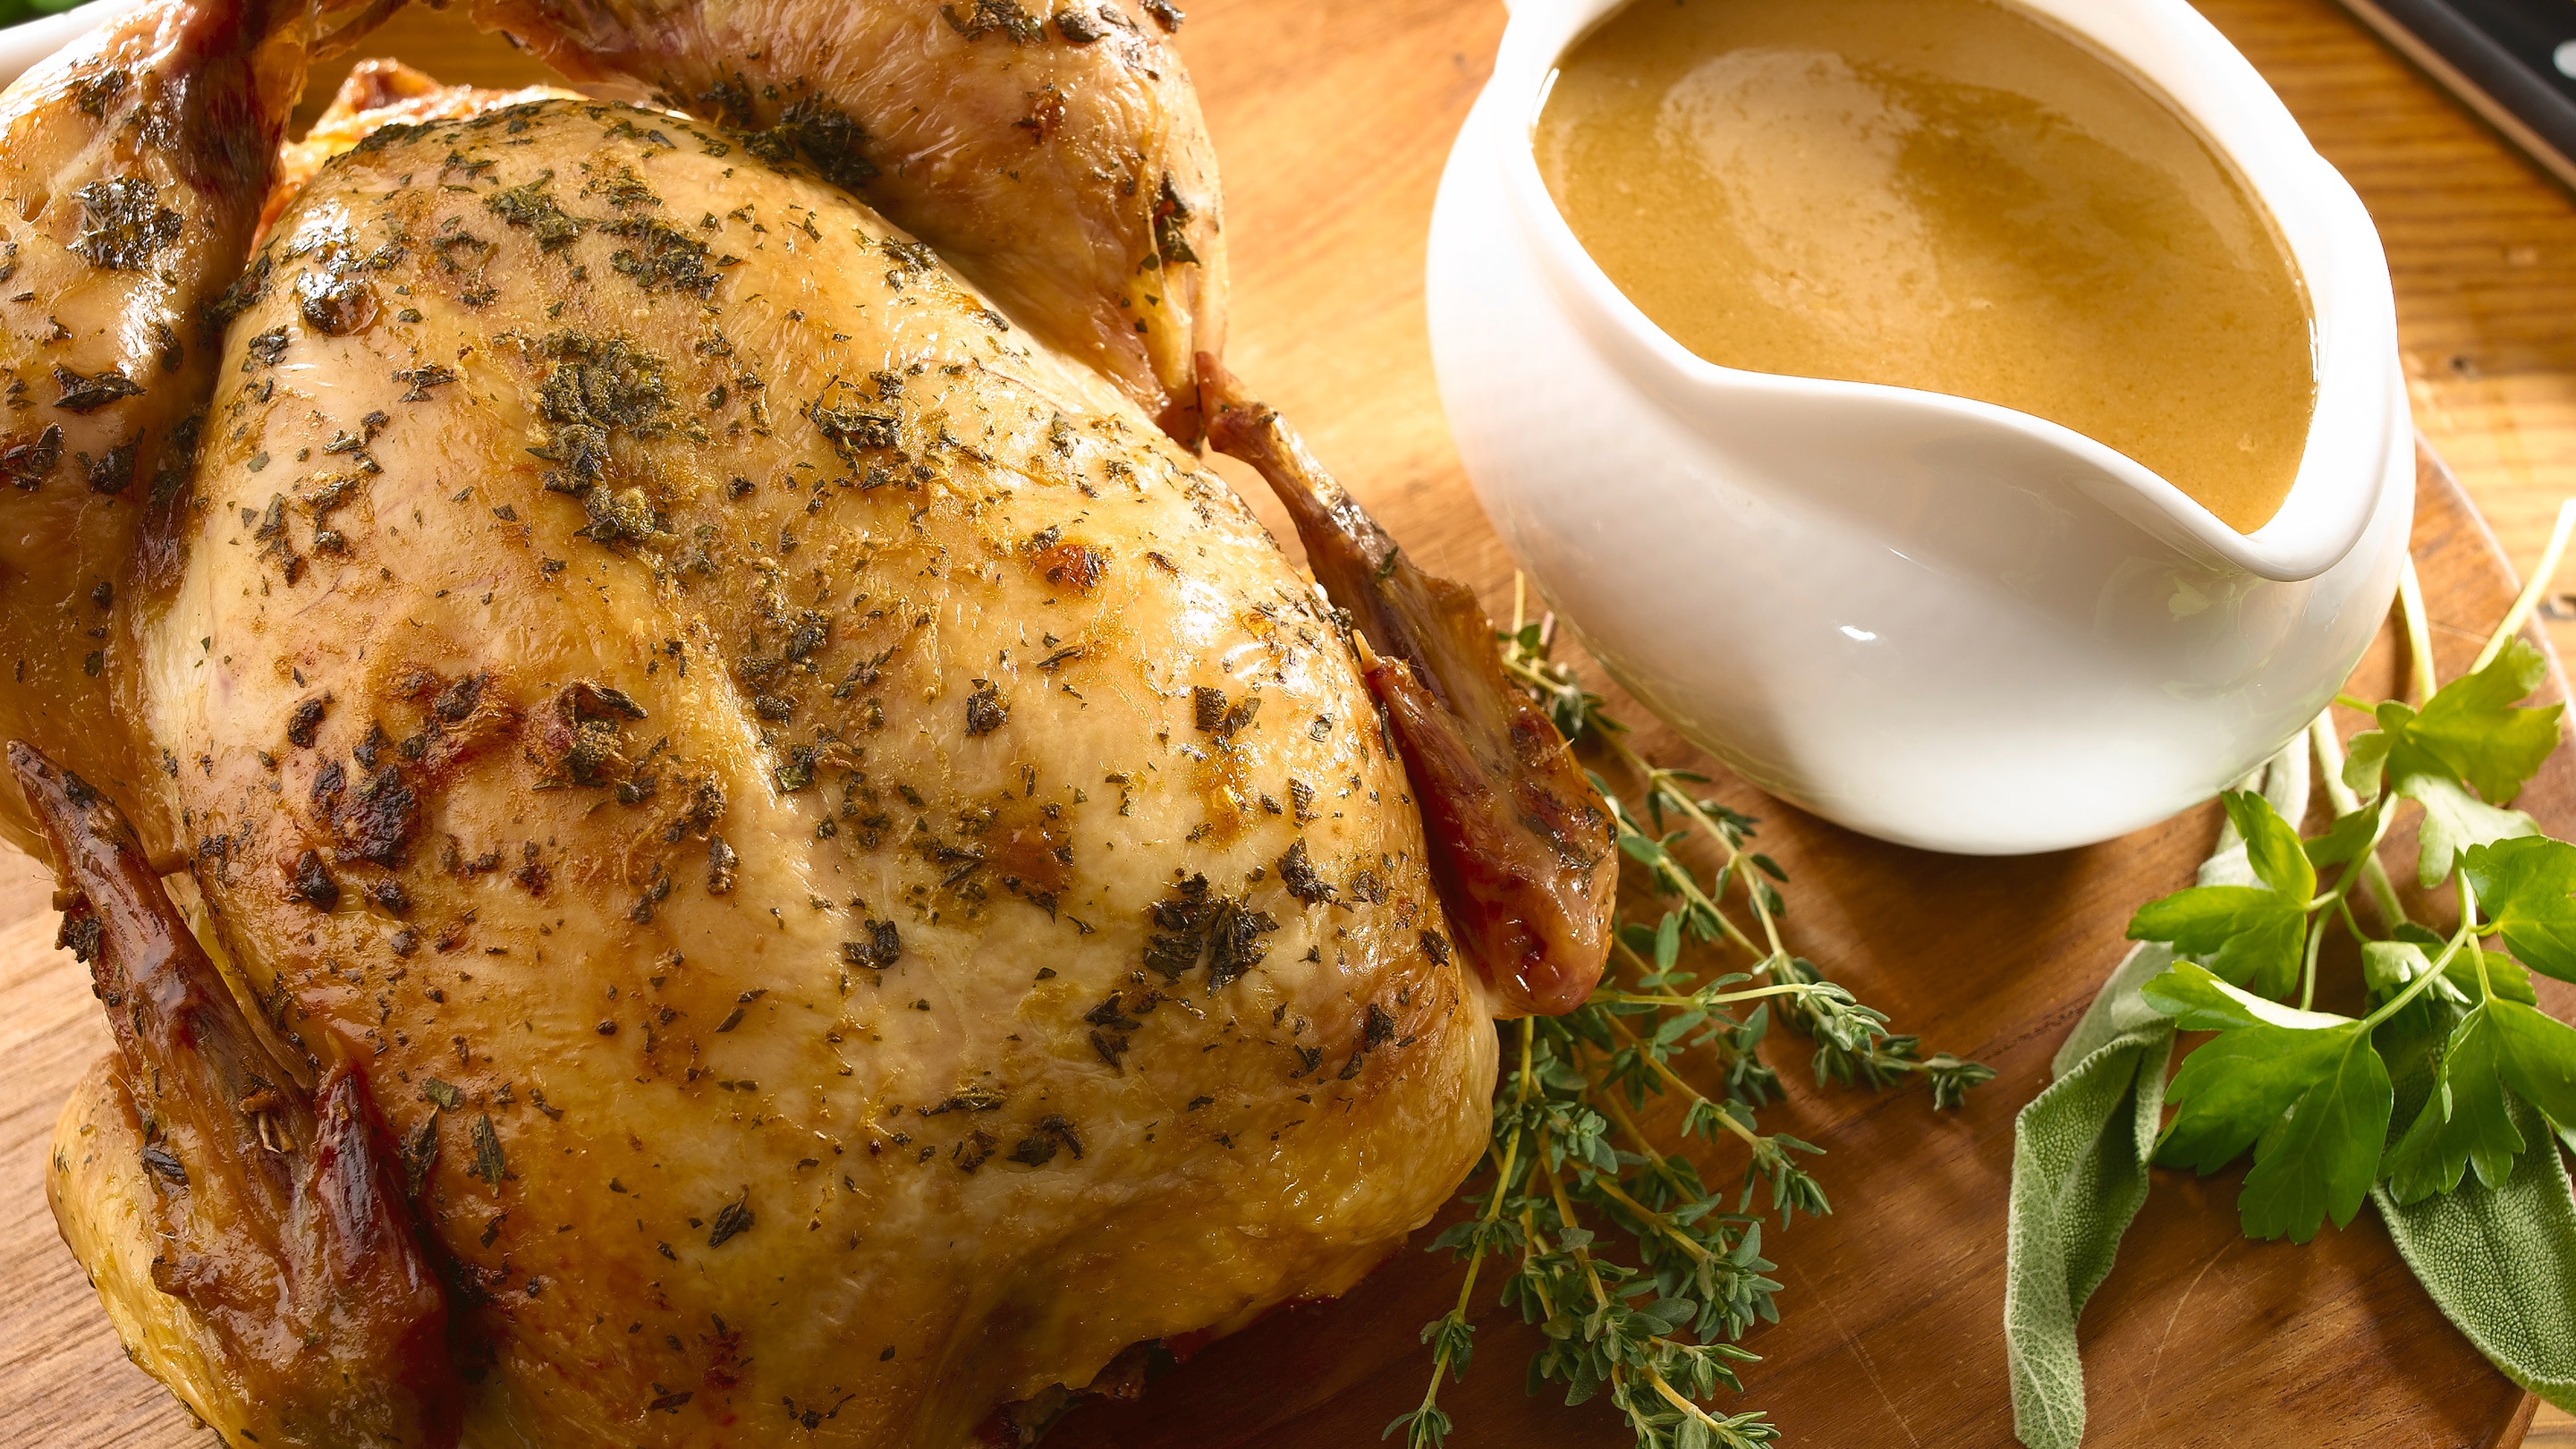 Herb-roasted whole chicken with a full gravy boat